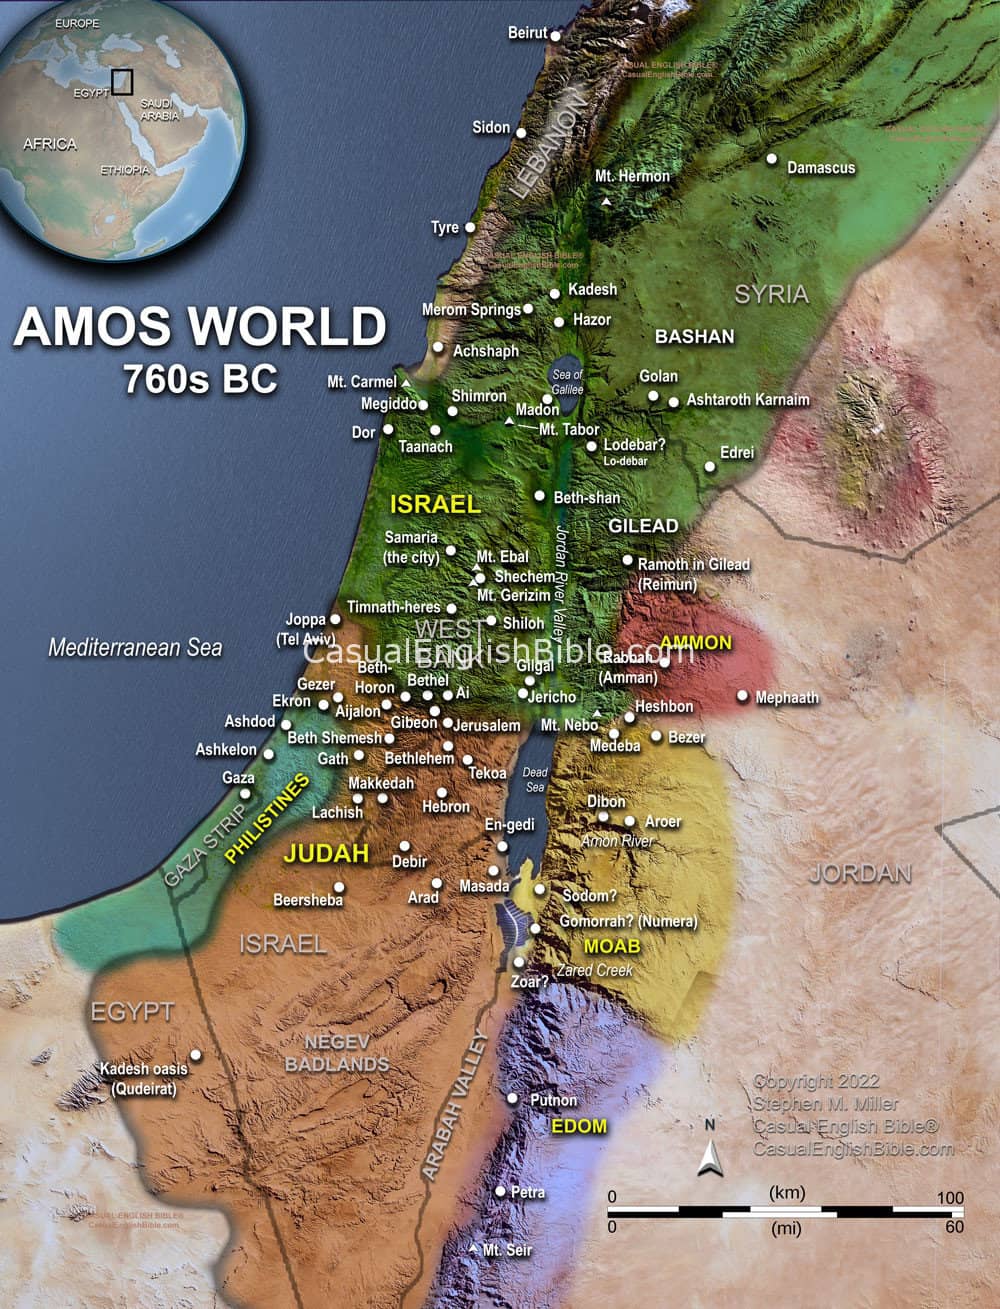 Map of Amos' world in Bible times 760s BC for Casual English Bible